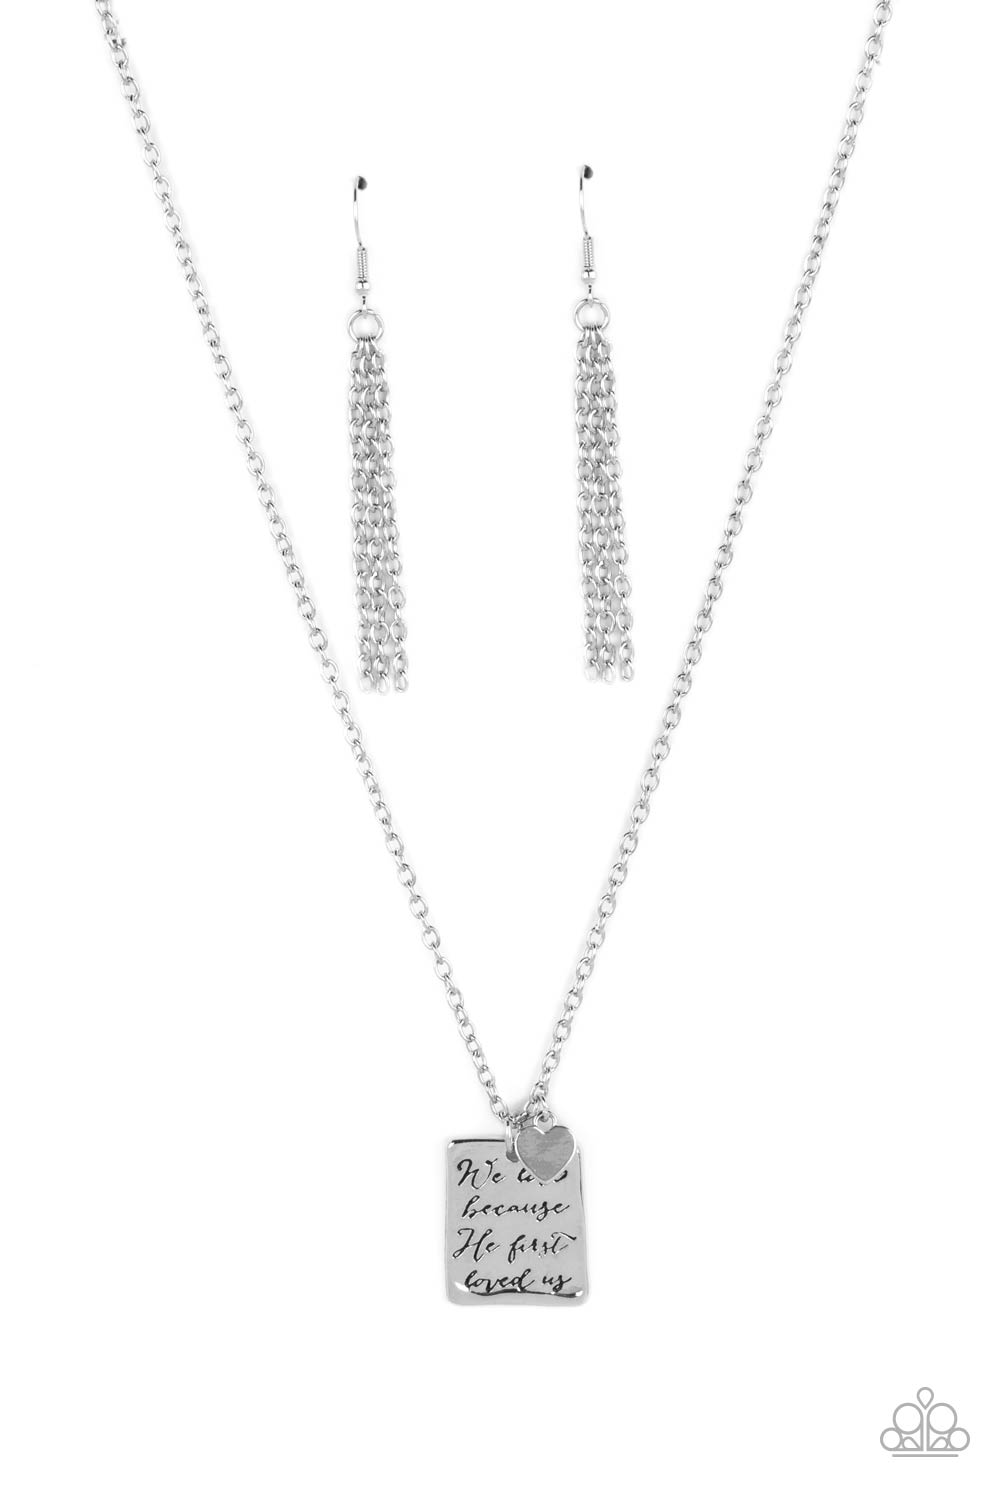 Divine Devotion Silver Inspirational Necklace - Paparazzi Accessories- lightbox - CarasShop.com - $5 Jewelry by Cara Jewels